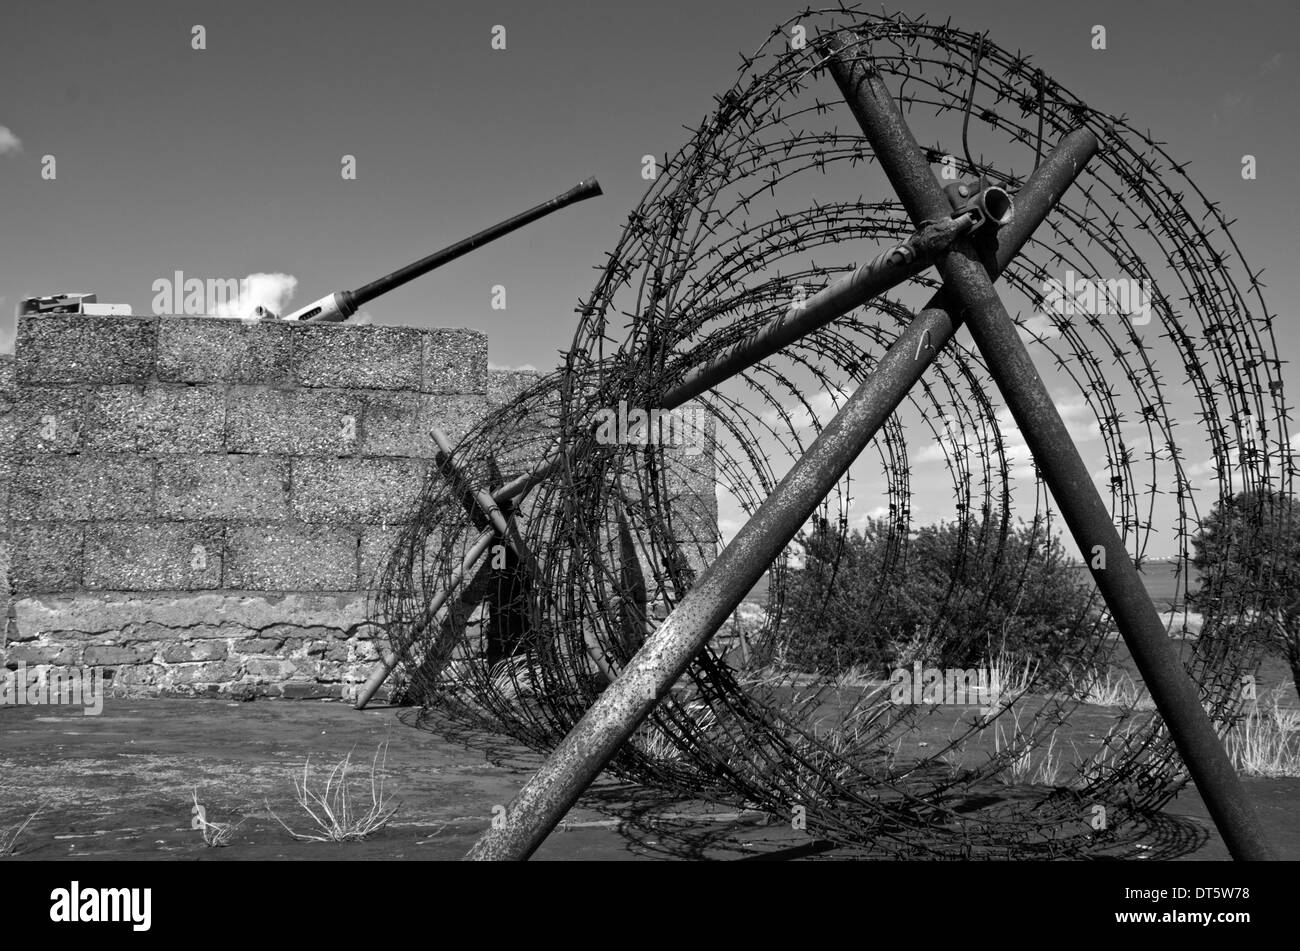 Coiled barbed wire on a gun emplacement. Black and white image. Stock Photo